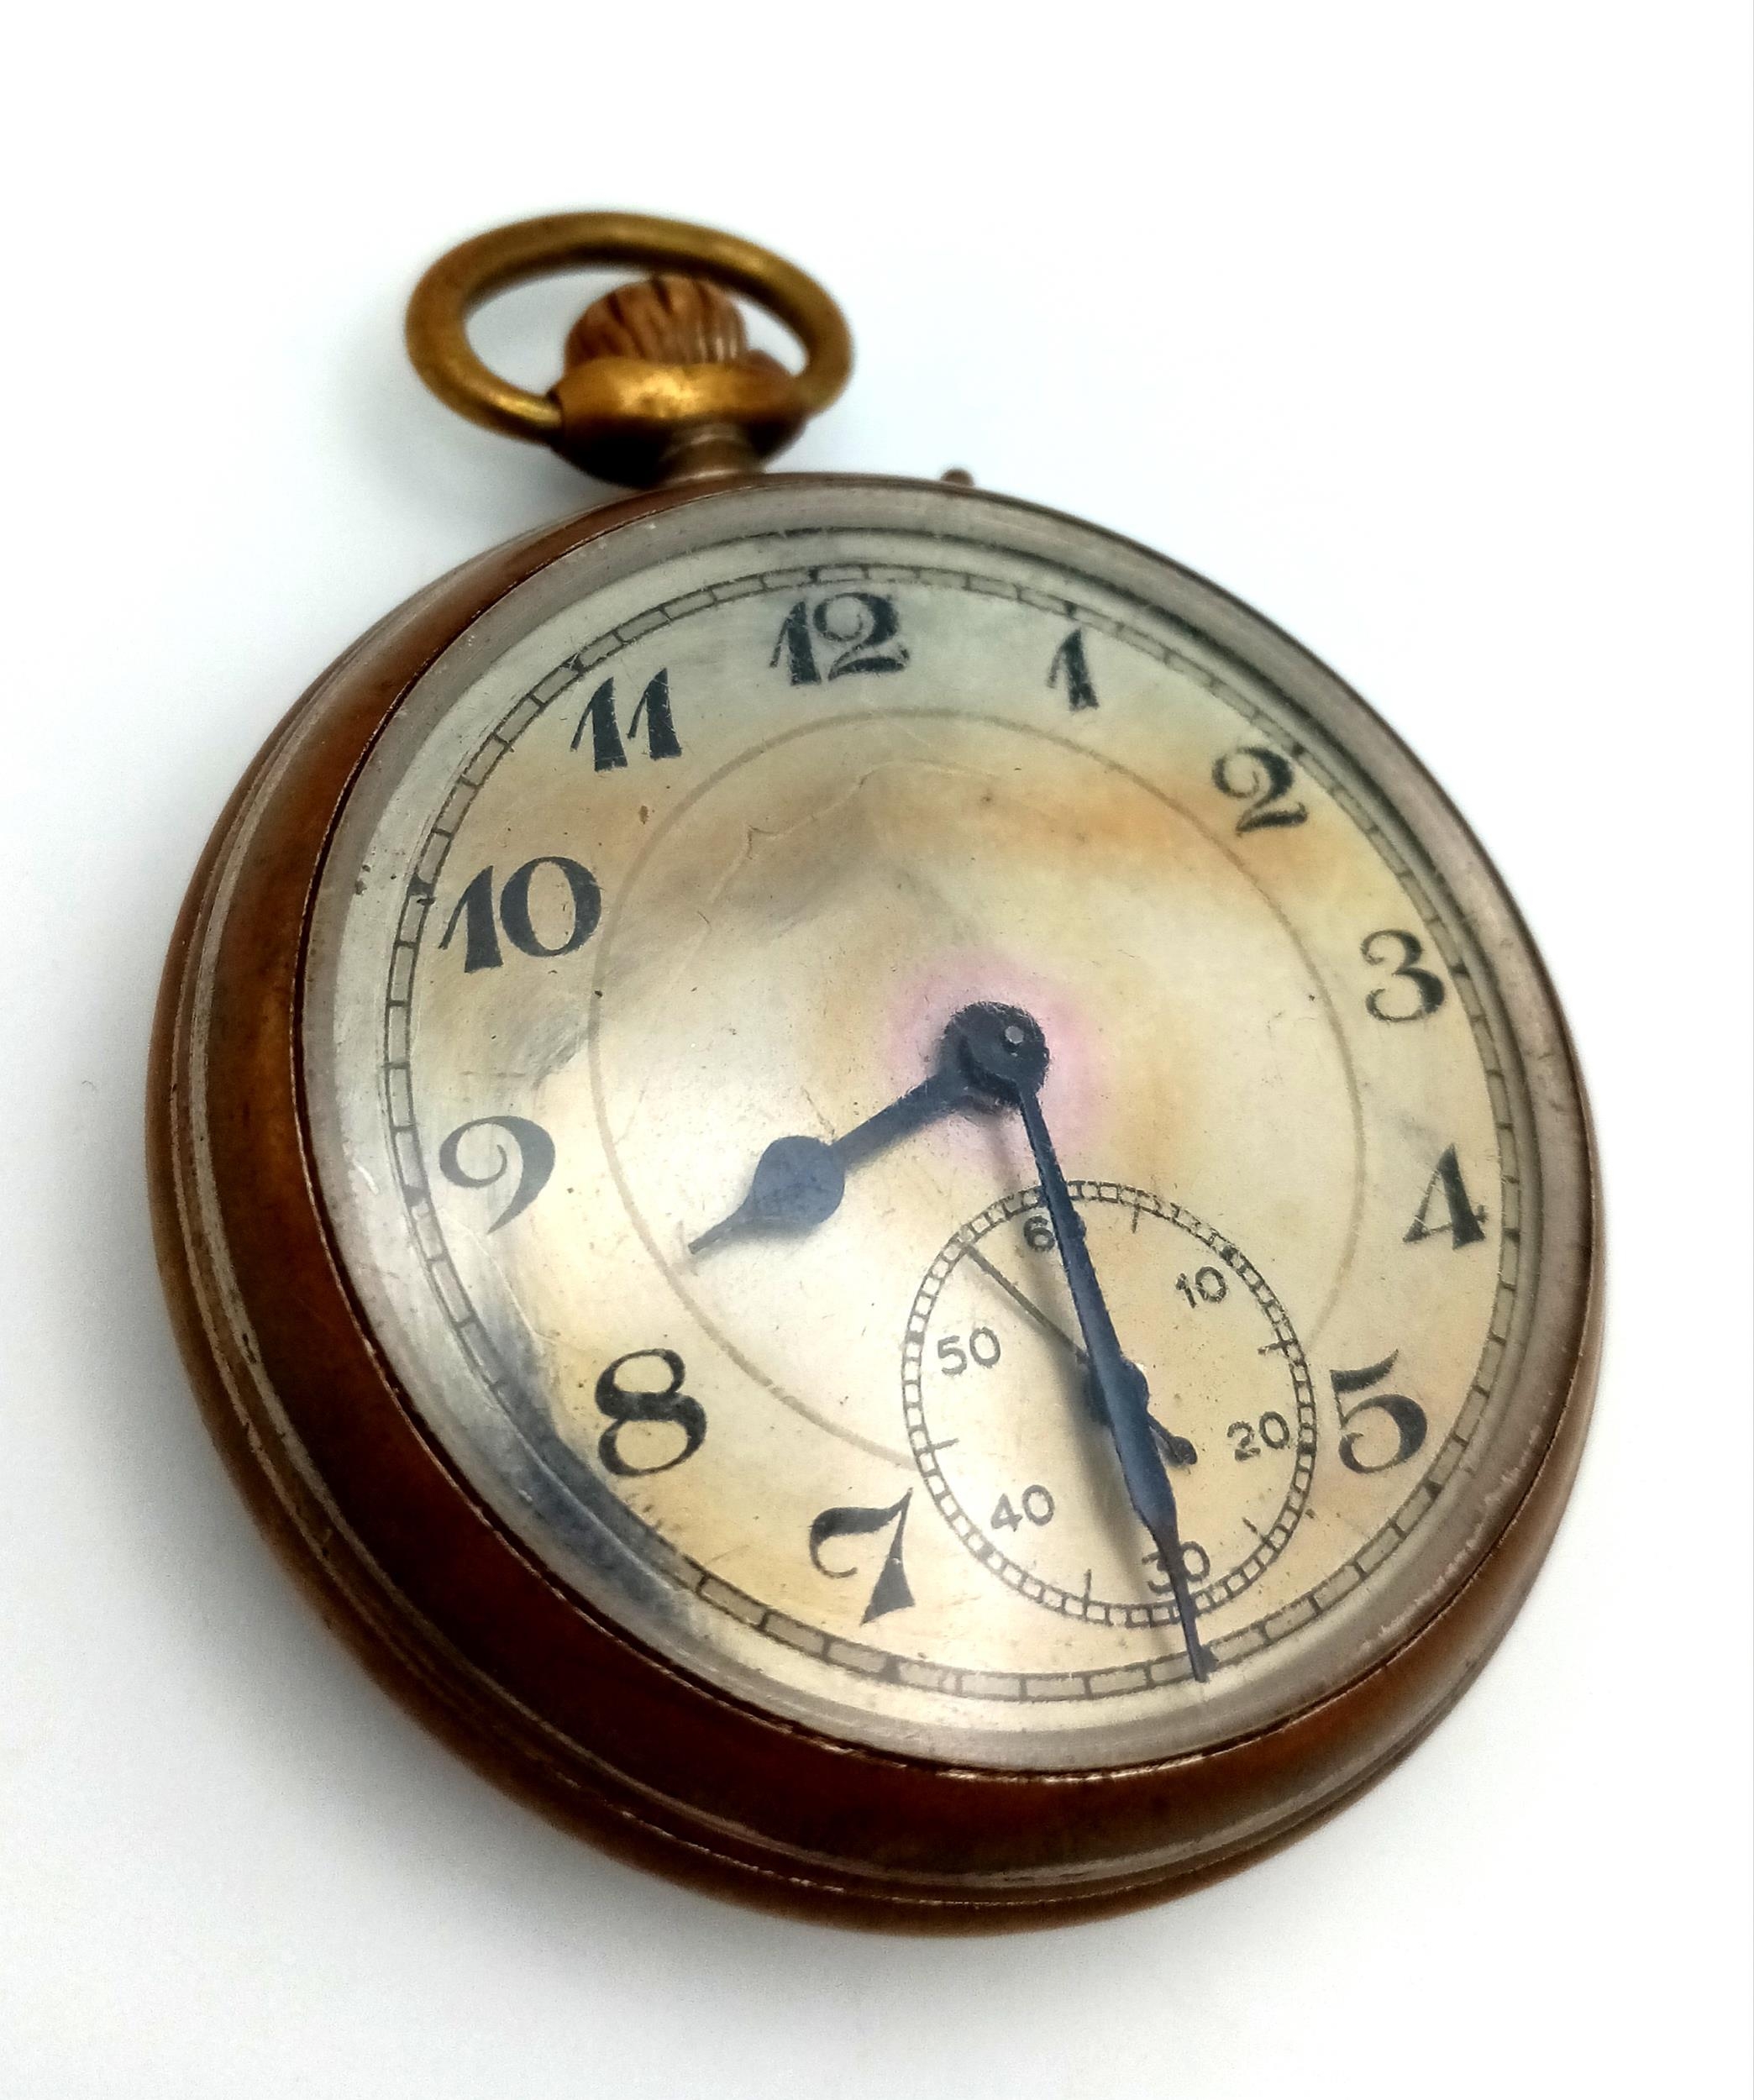 WW2 Period German Pocket Watch dedicated to a Soldier in the II/SS Germania Regiment which were - Image 2 of 4